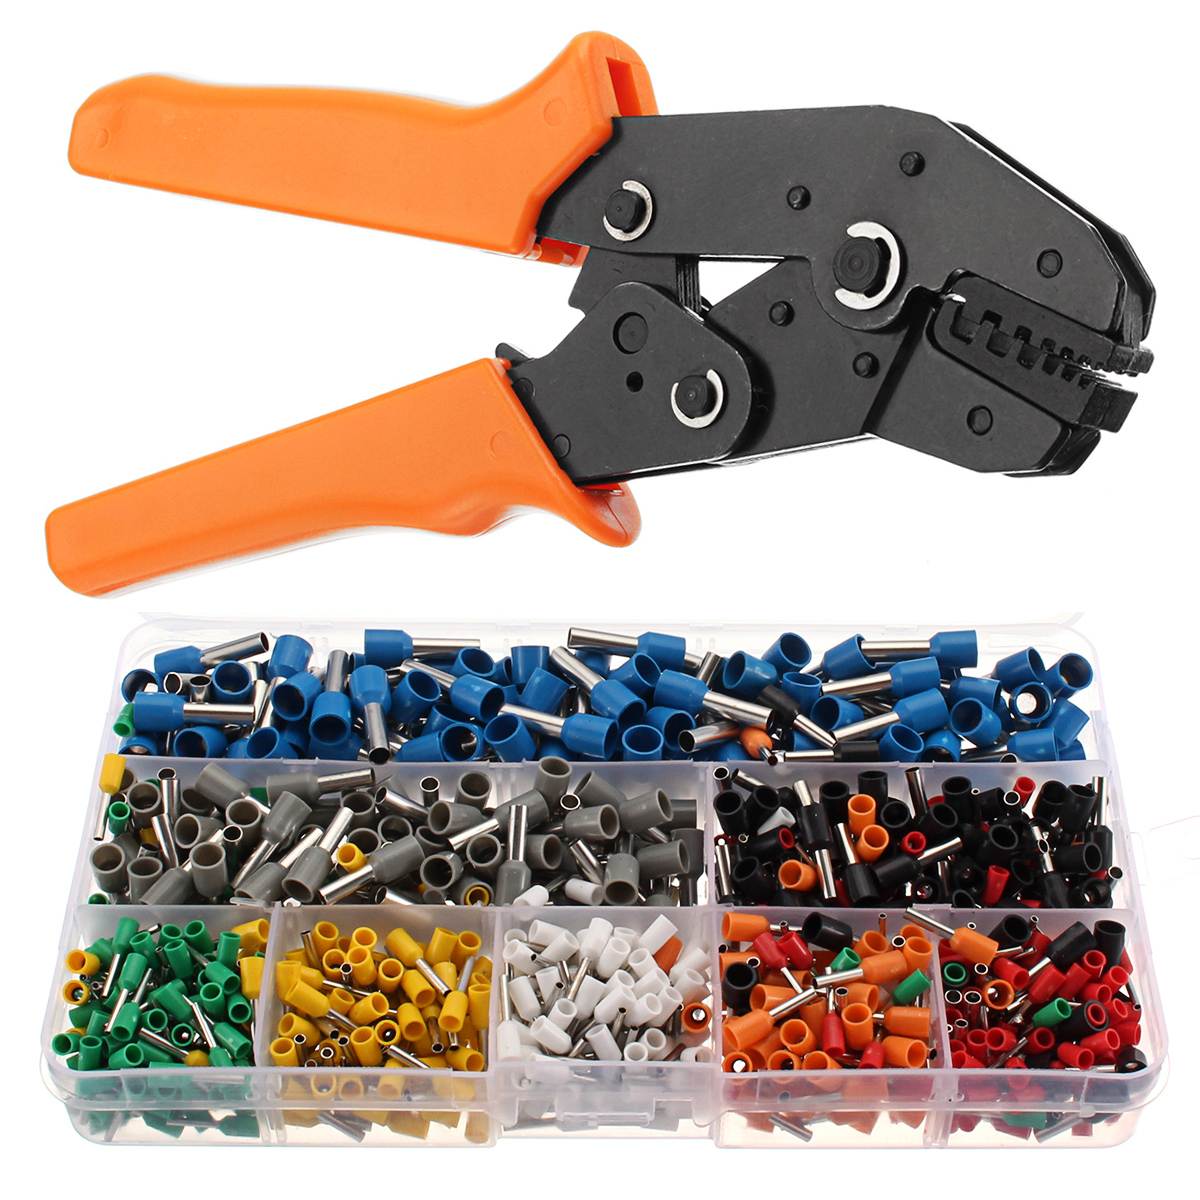 

Electrical Ratchet Crimping Pliers Tool with 800 Wire Stripper Crimper Terminal Kit